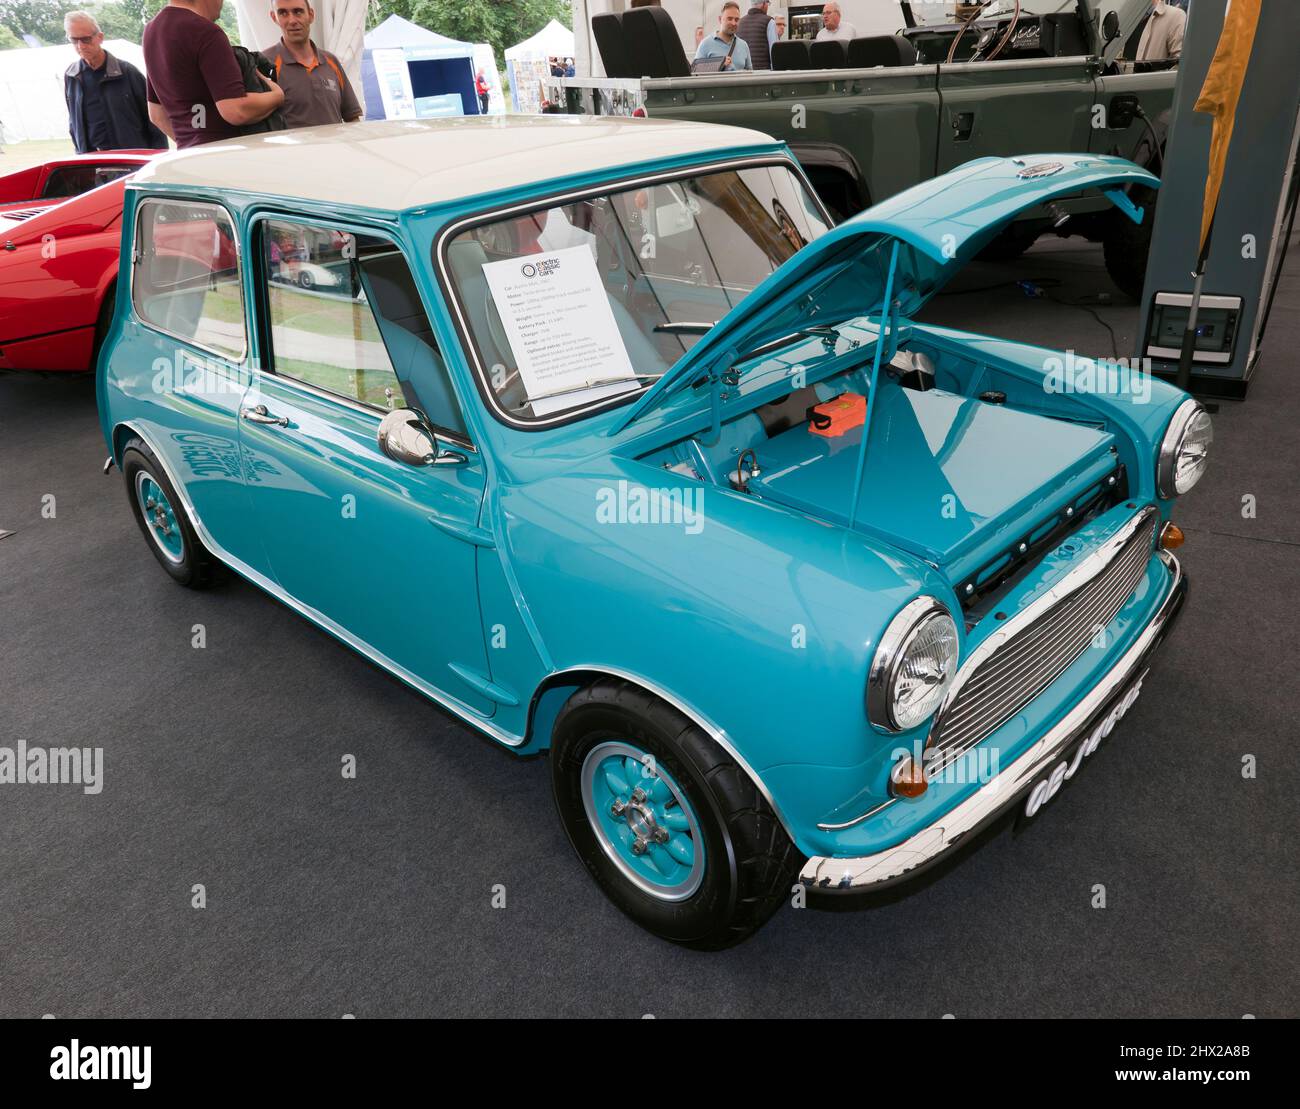 Three-quarters front view of a 1967 Austin Mini, fitted with a Tesla Drive Unit, by electric classic cars, on display at the London Classic Car Show Stock Photo